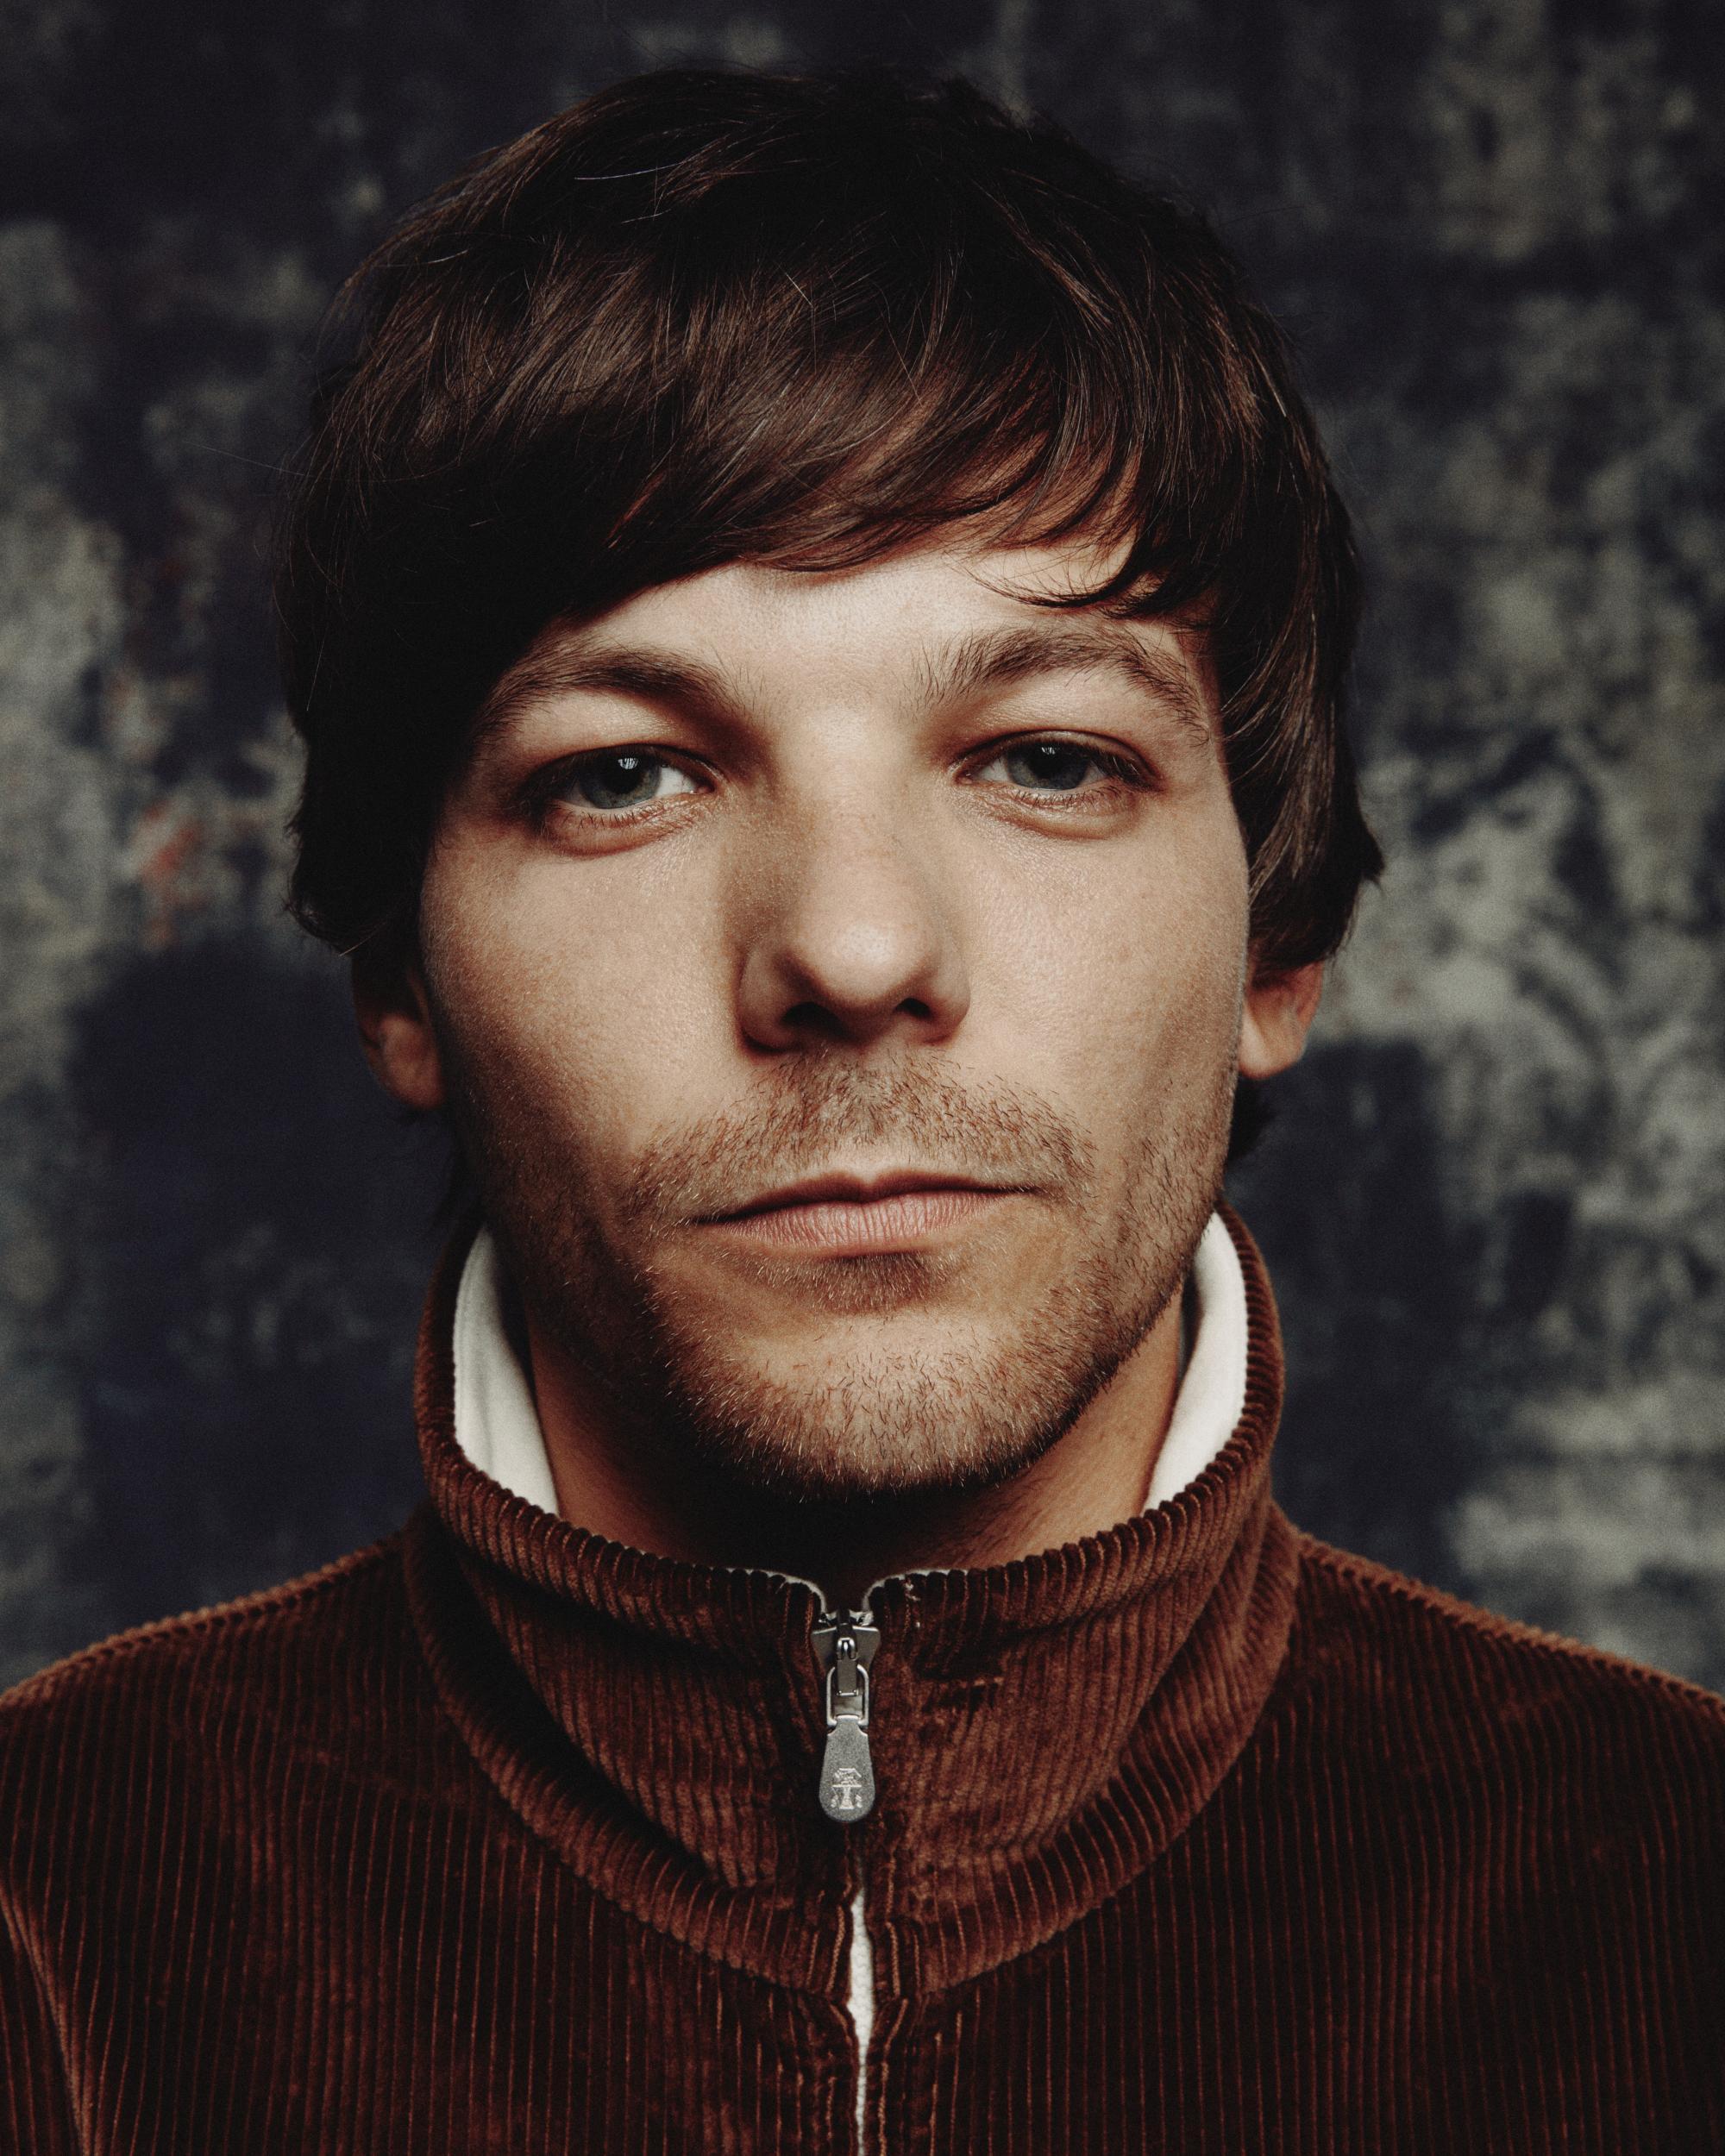 Walls by Louis Tomlinson is set to re-enter the Top 20 UK Album